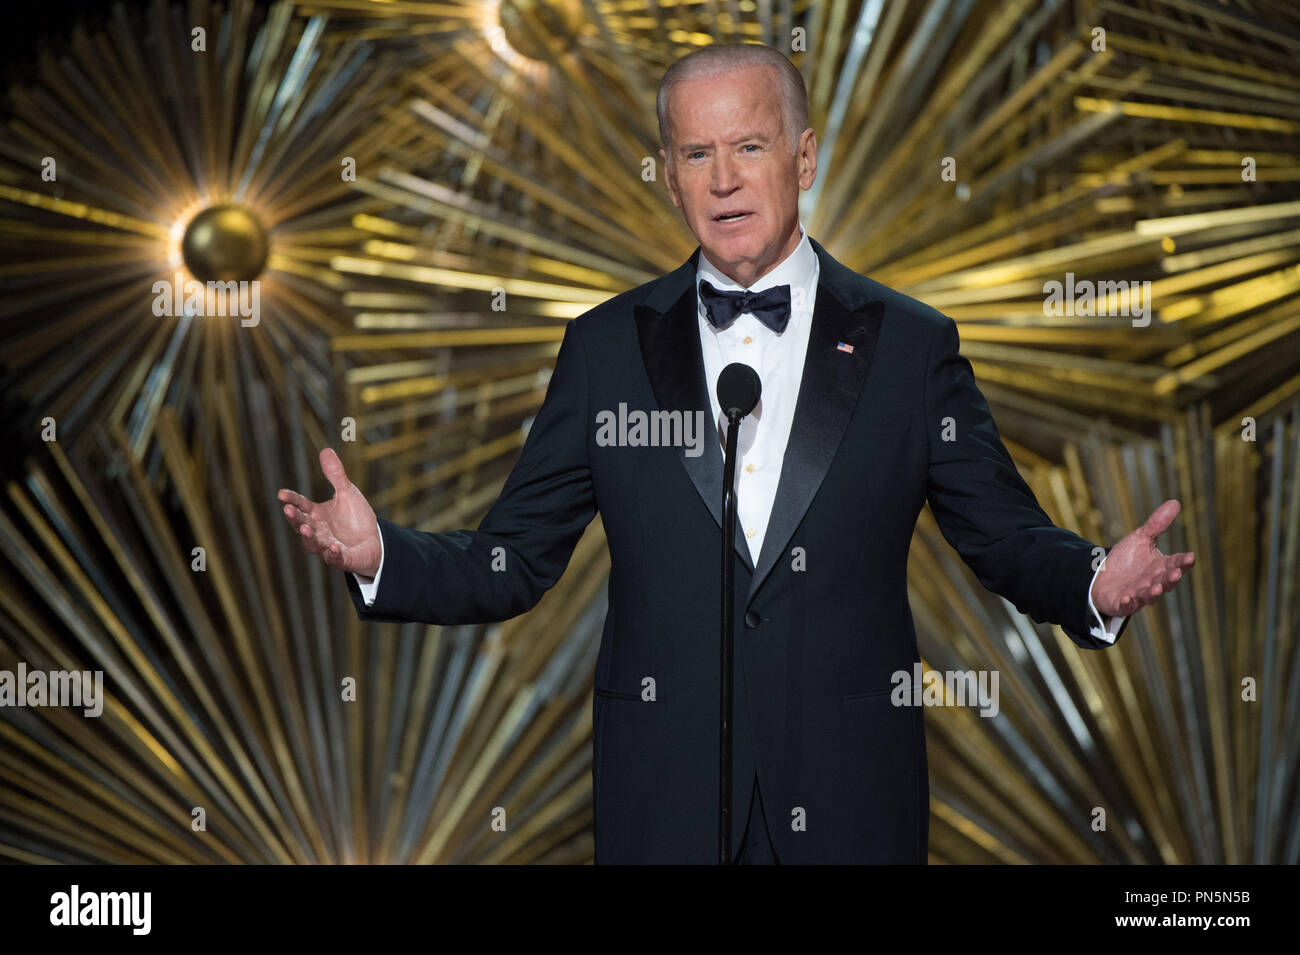 Vice President Joe Biden presents during the live ABC Telecast of The 88th Oscars® at the Dolby® Theatre in Hollywood, CA on Sunday, February 28, 2016.  File Reference # 32854 573THA  For Editorial Use Only -  All Rights Reserved Stock Photo